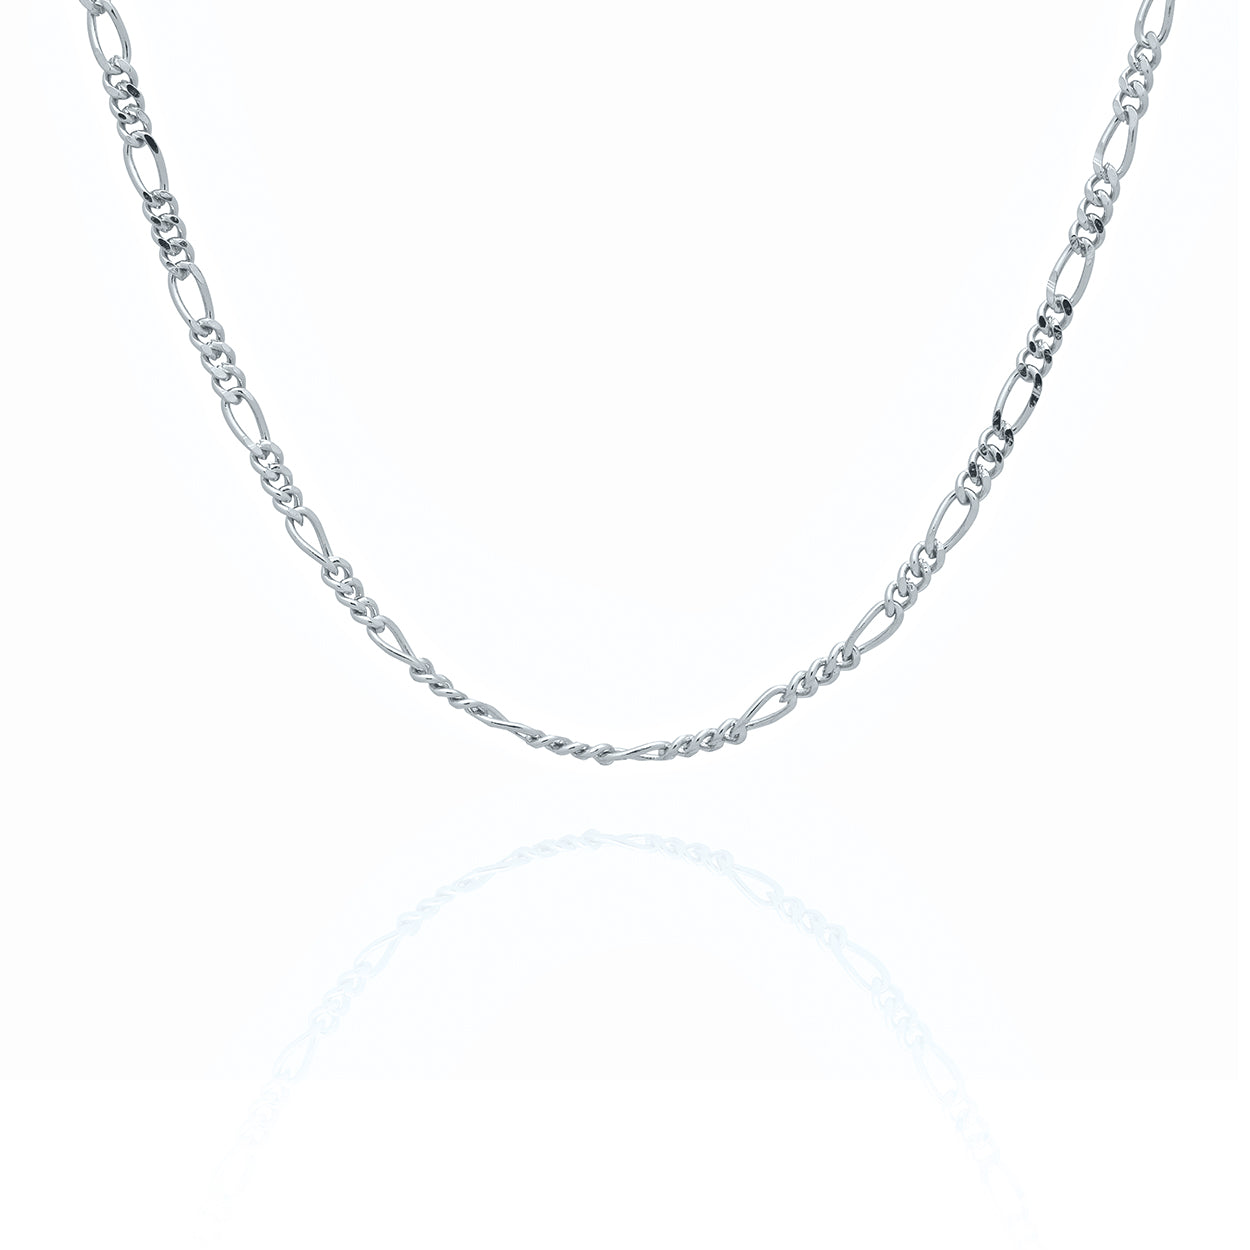 Sterling Silver Figaro ChokerSterling Silver Figaro Style Choker Chain Plated in White Rhodium